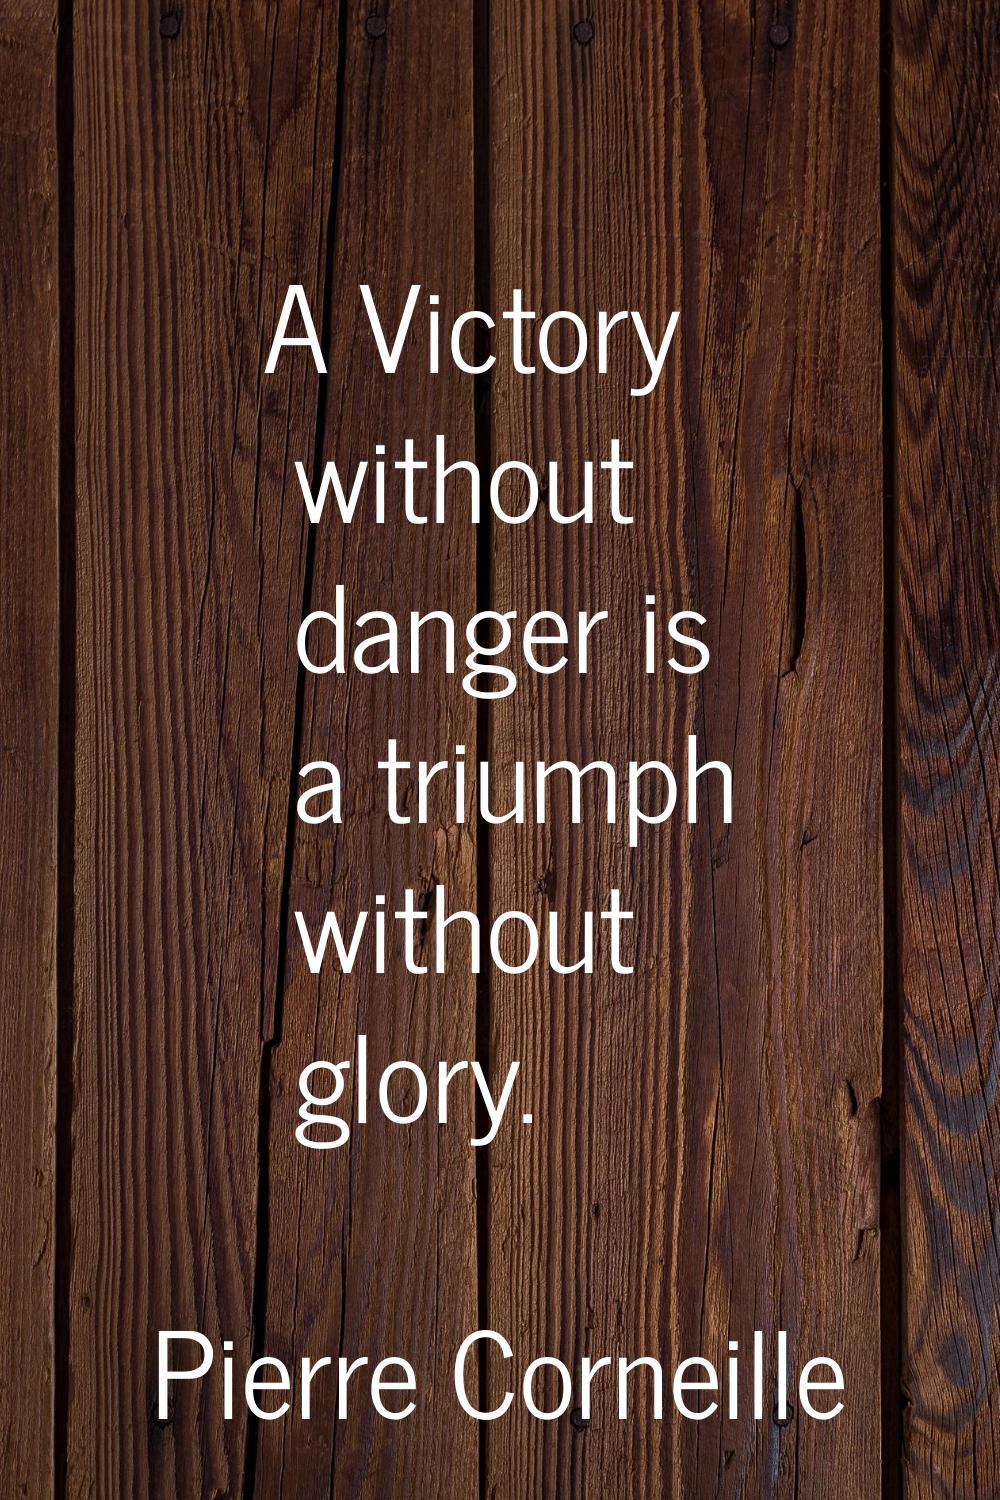 A Victory without danger is a triumph without glory.